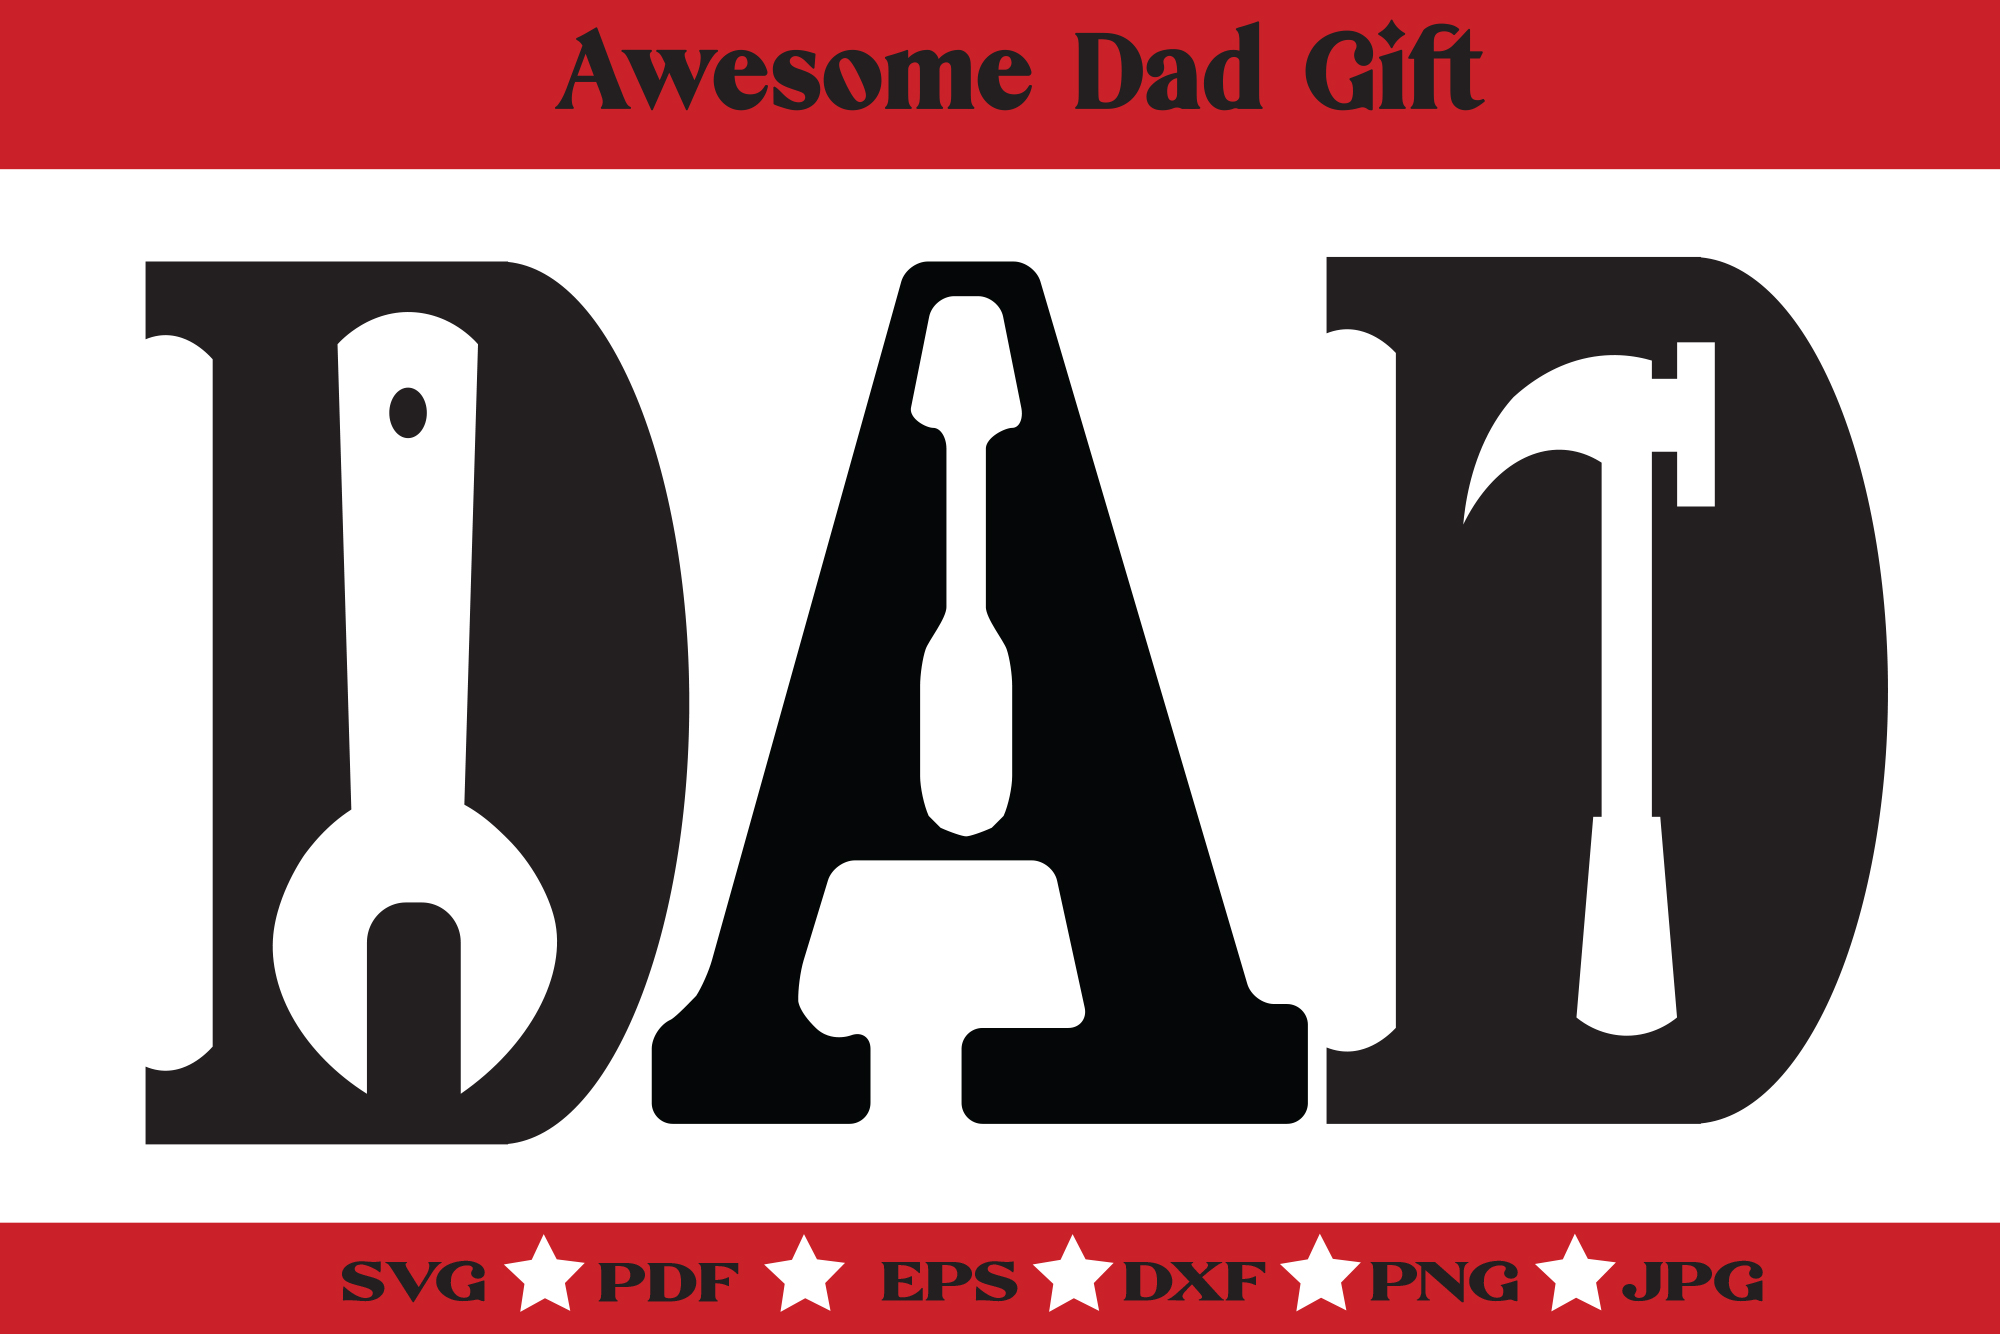 Download Awesome Dad Gift Graphic By Mclaughlin Mall Creative Fabrica